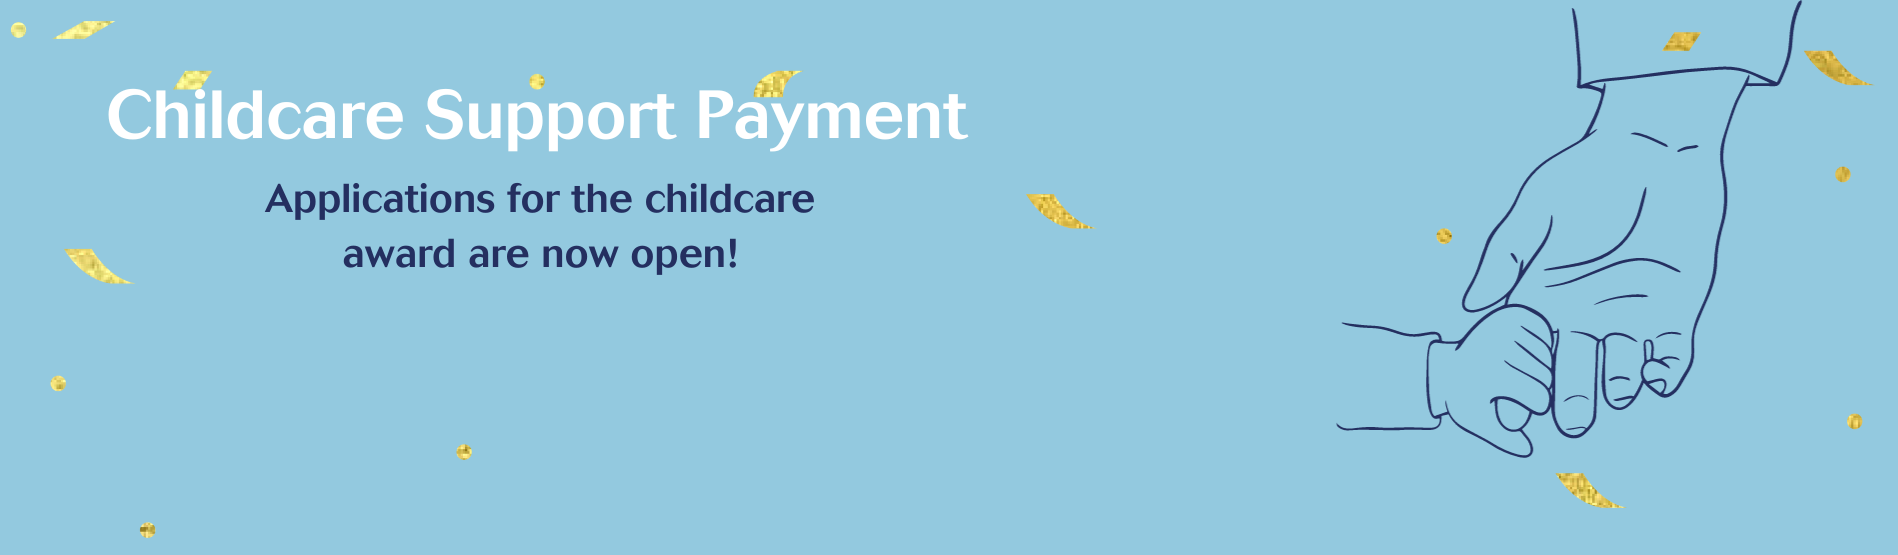 Childcare Support Payment Logo